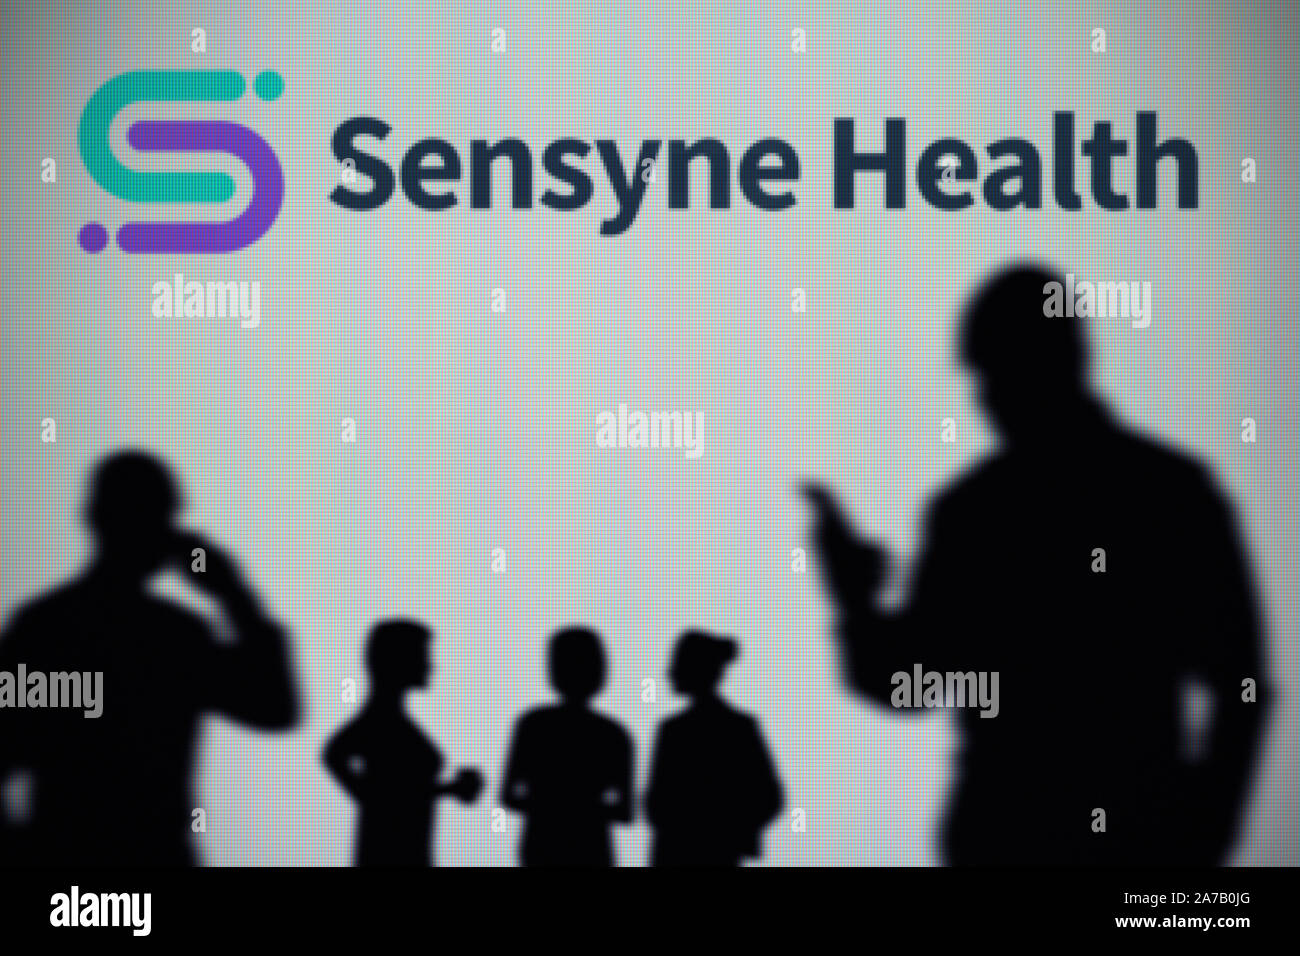 The Sensyne Health logo is seen on an LED screen in the background while a silhouetted person uses a smartphone (Editorial use only) Stock Photo